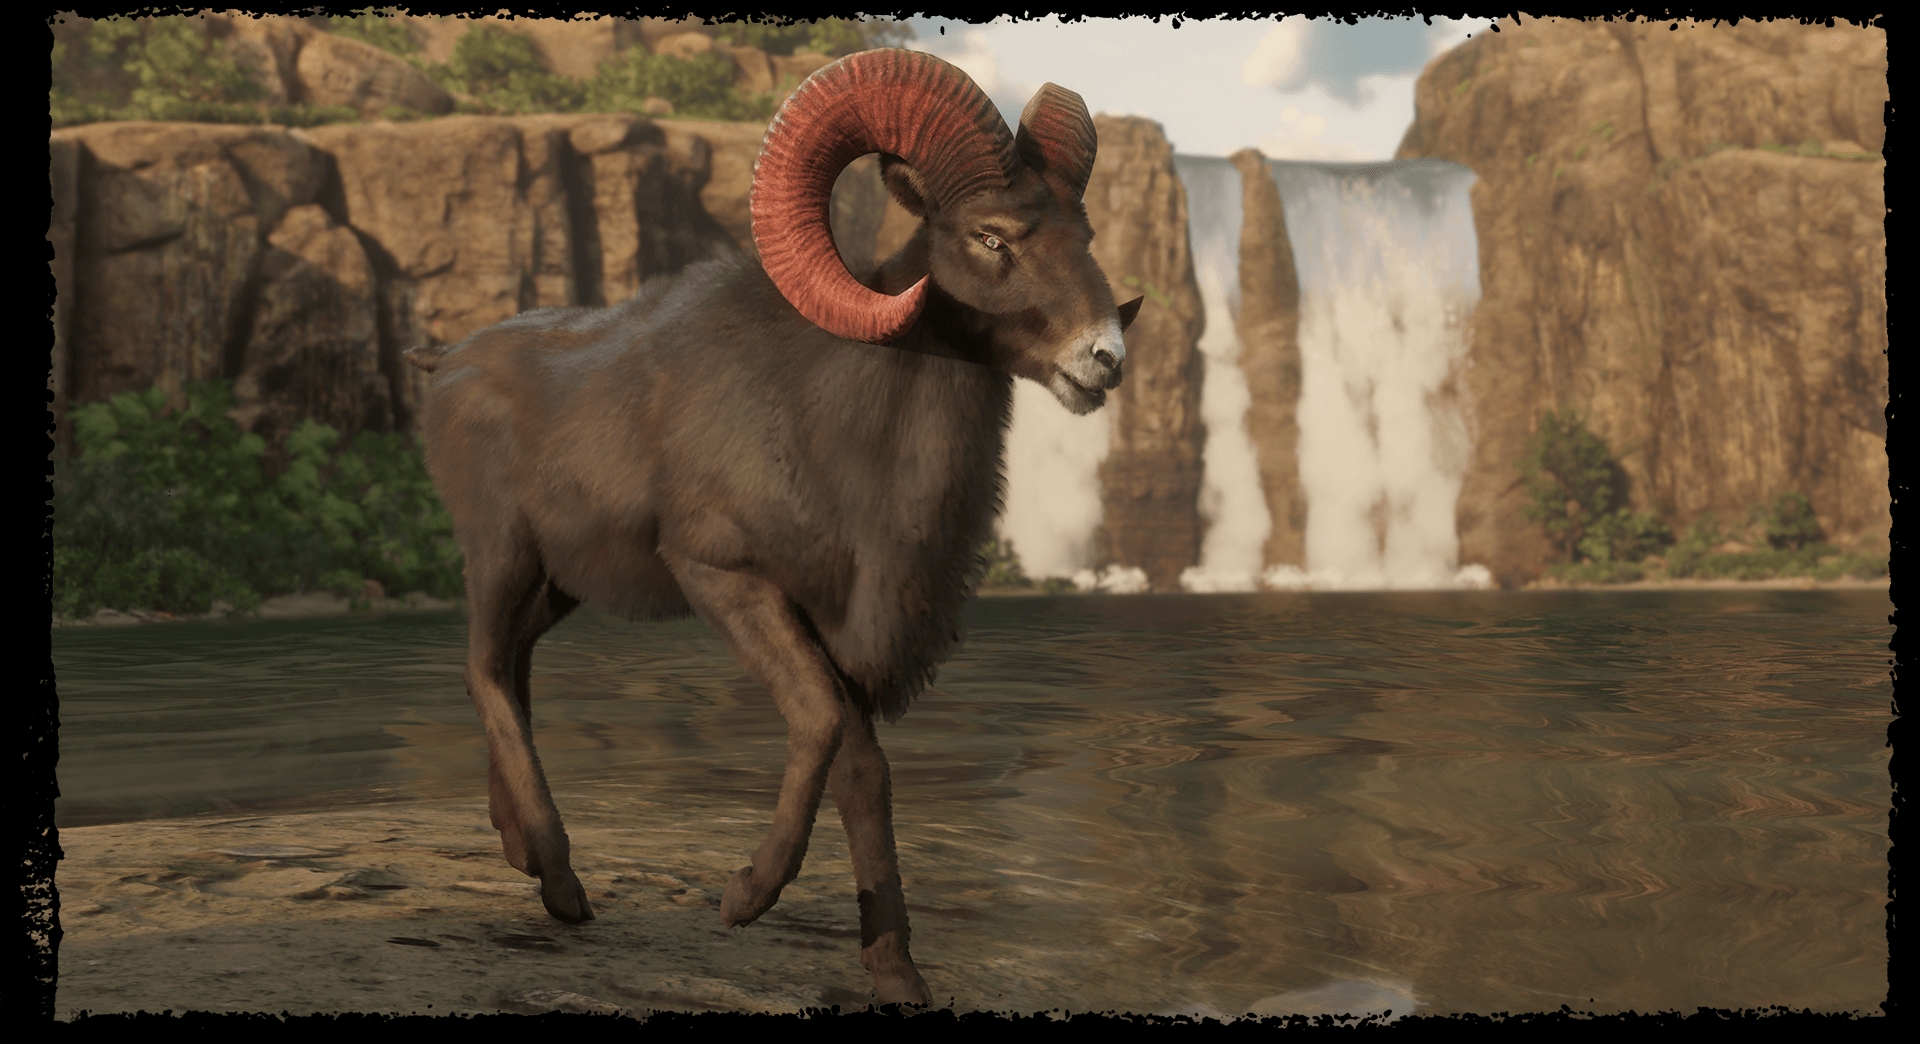 The Naturalist Jetzt In Red Dead Online Verfugbar Rdrvision Com Red Dead Redemption 2 Red Dead Redemption 1 And Red Dead Revolver News Downloads Community And More 1st Fansite